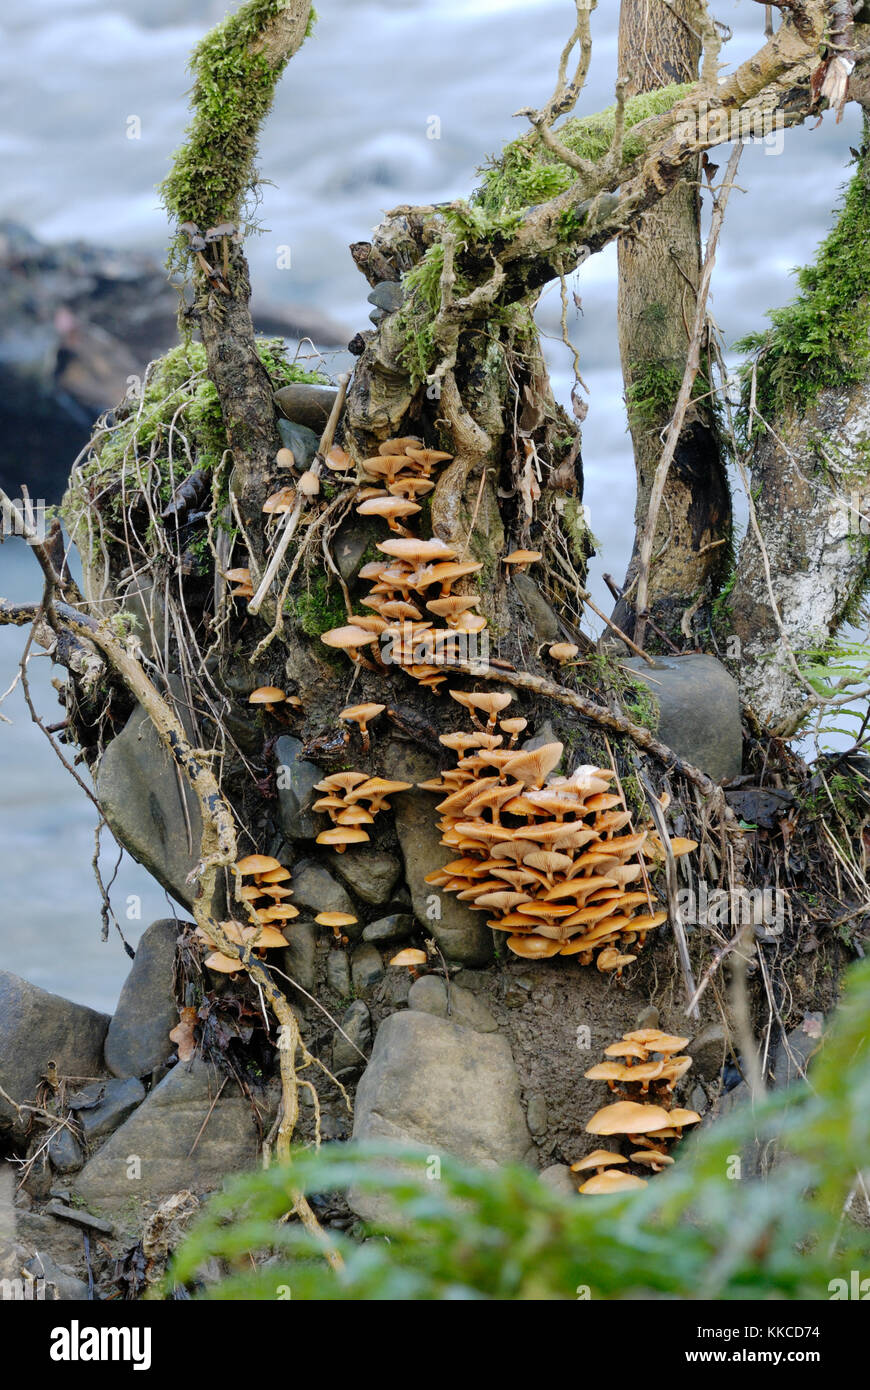 Galerina mutabilis fungi on an Ash tree overturned in a river, Wales, UK. Stock Photo